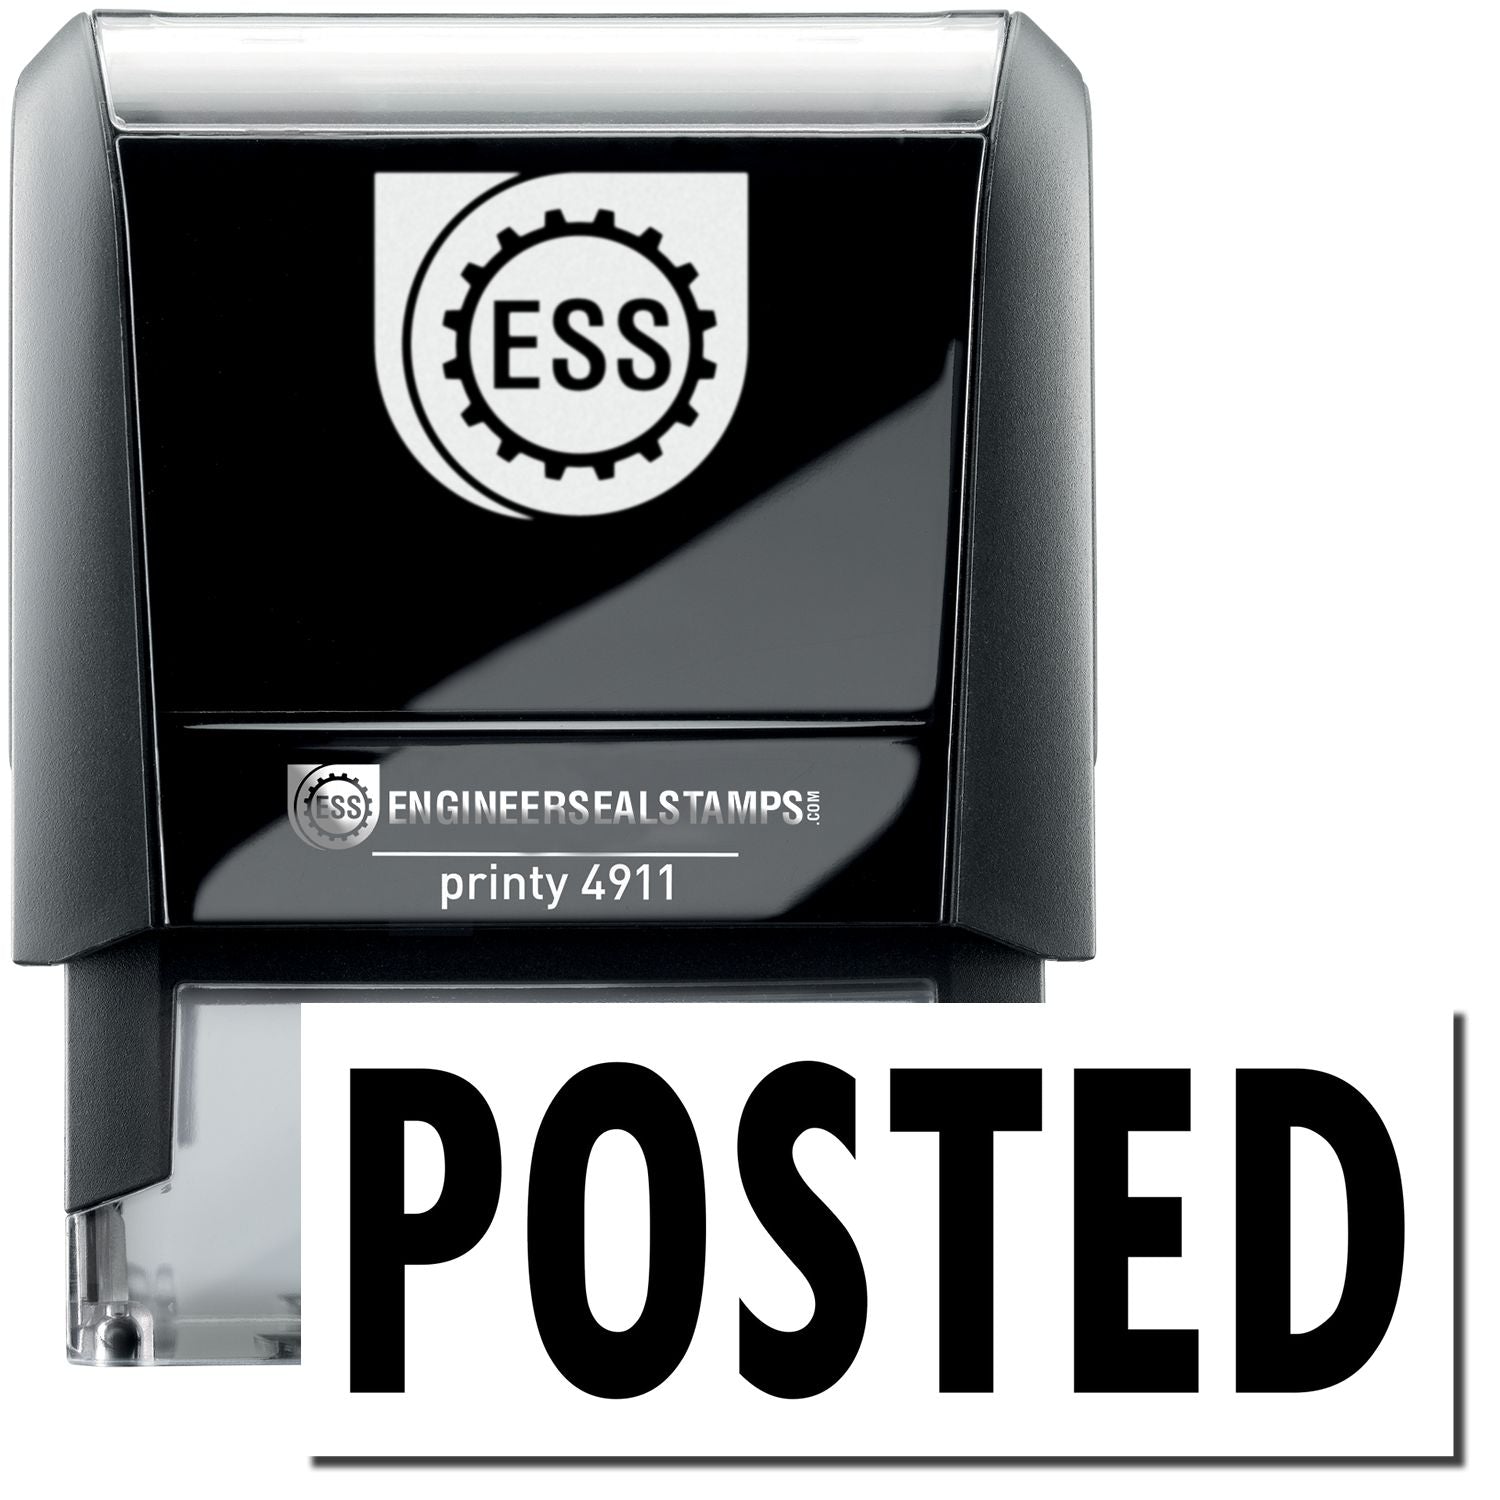 A self-inking stamp with a stamped image showing how the text "POSTED" is displayed after stamping.